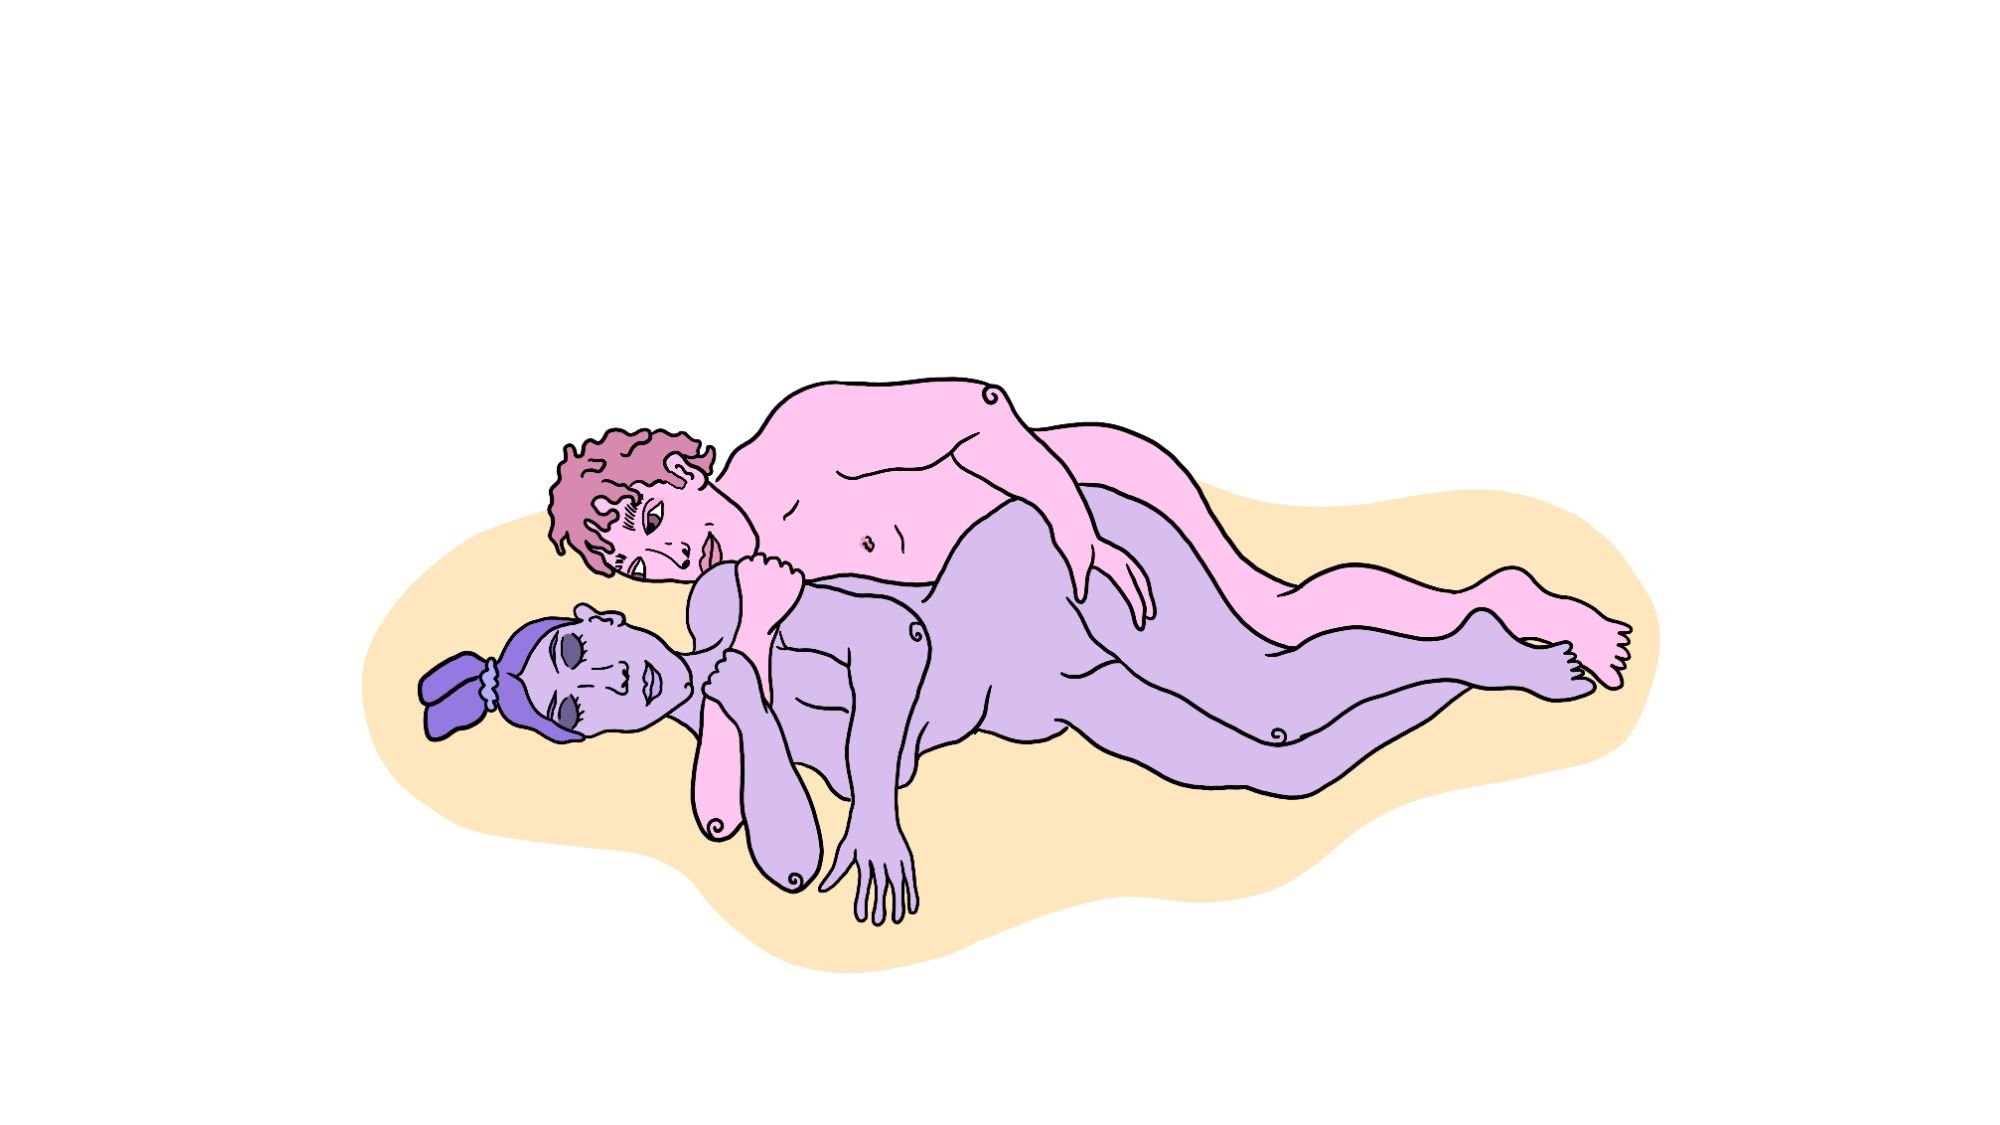 Kamasutra positions: The Curled Angel